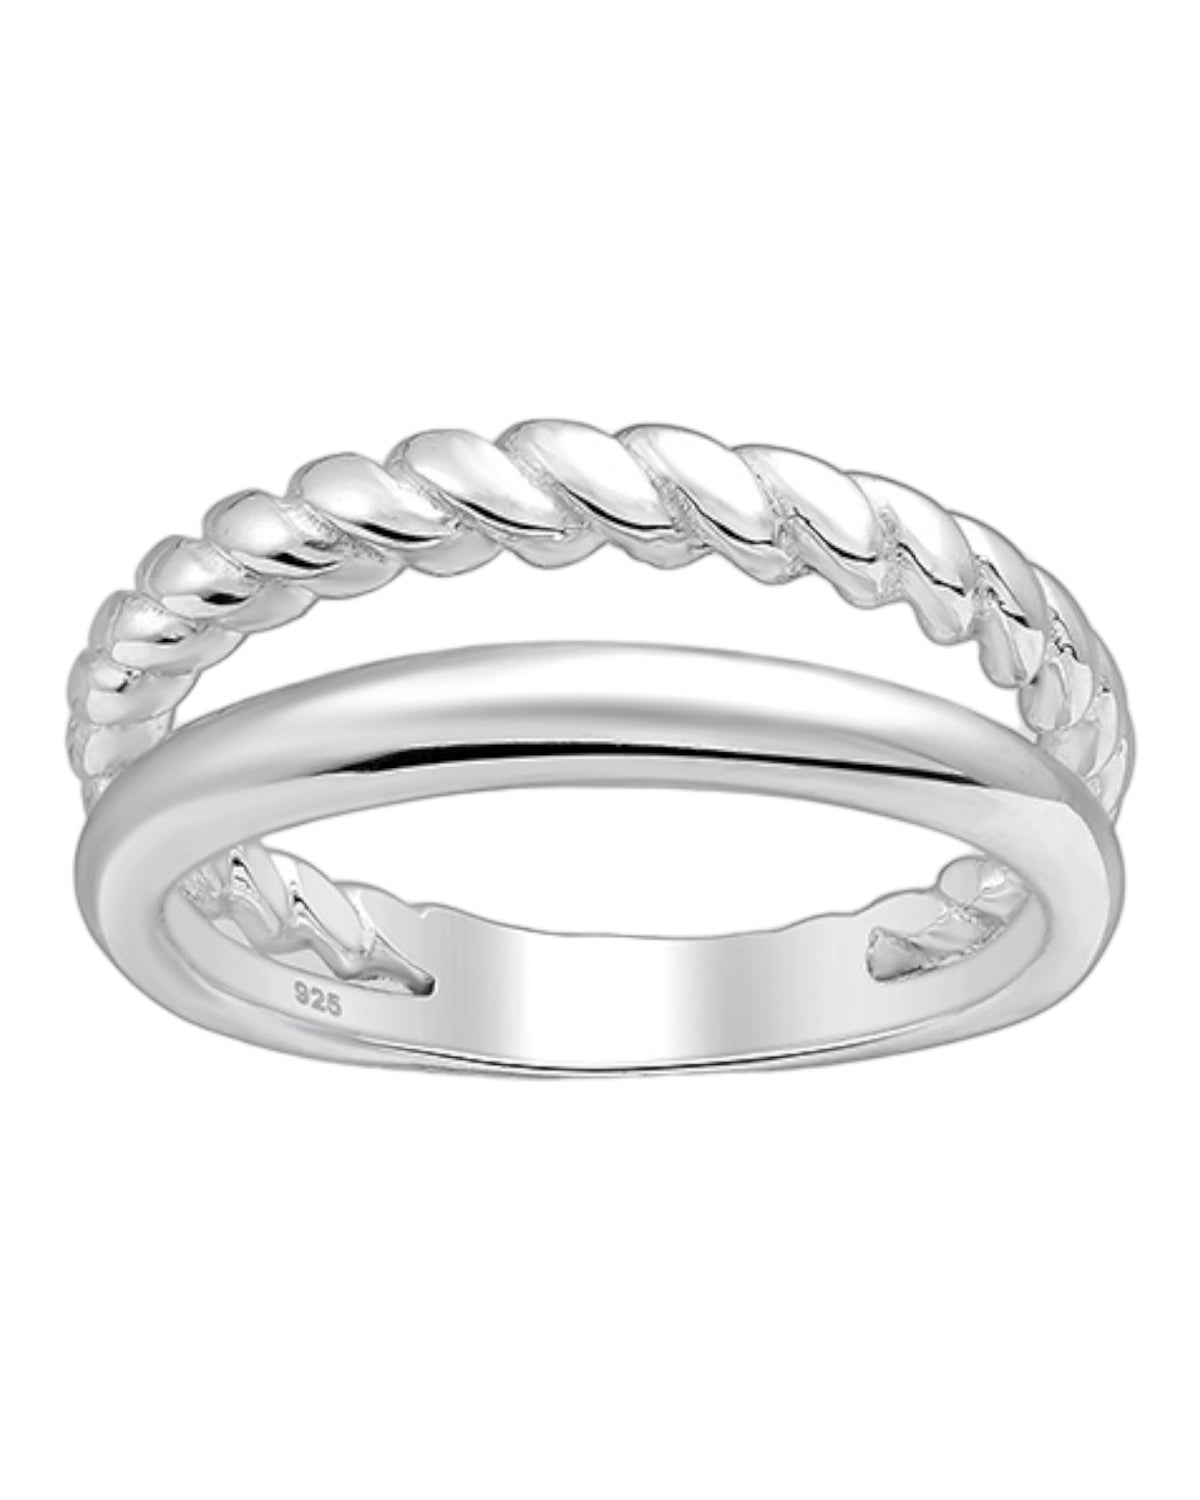 stack rings,  white gold stack rings, rings to pair with david yurman jewelry, layered ring, double rings, real sterling silver rings, real jewelry, fine jewelry, nice rings, cute rings, new womens fashion, christmas gift ideas, birthday gifts ideas, nice jewelry, waterproof rings,  stack rings, layered rings, nice jewelry, viral jewelry, plain jewelry, kesley fashion, kesley jewelry,  tarnish free jewelry for cheap, designer jewelry, unisex ring wedding bands